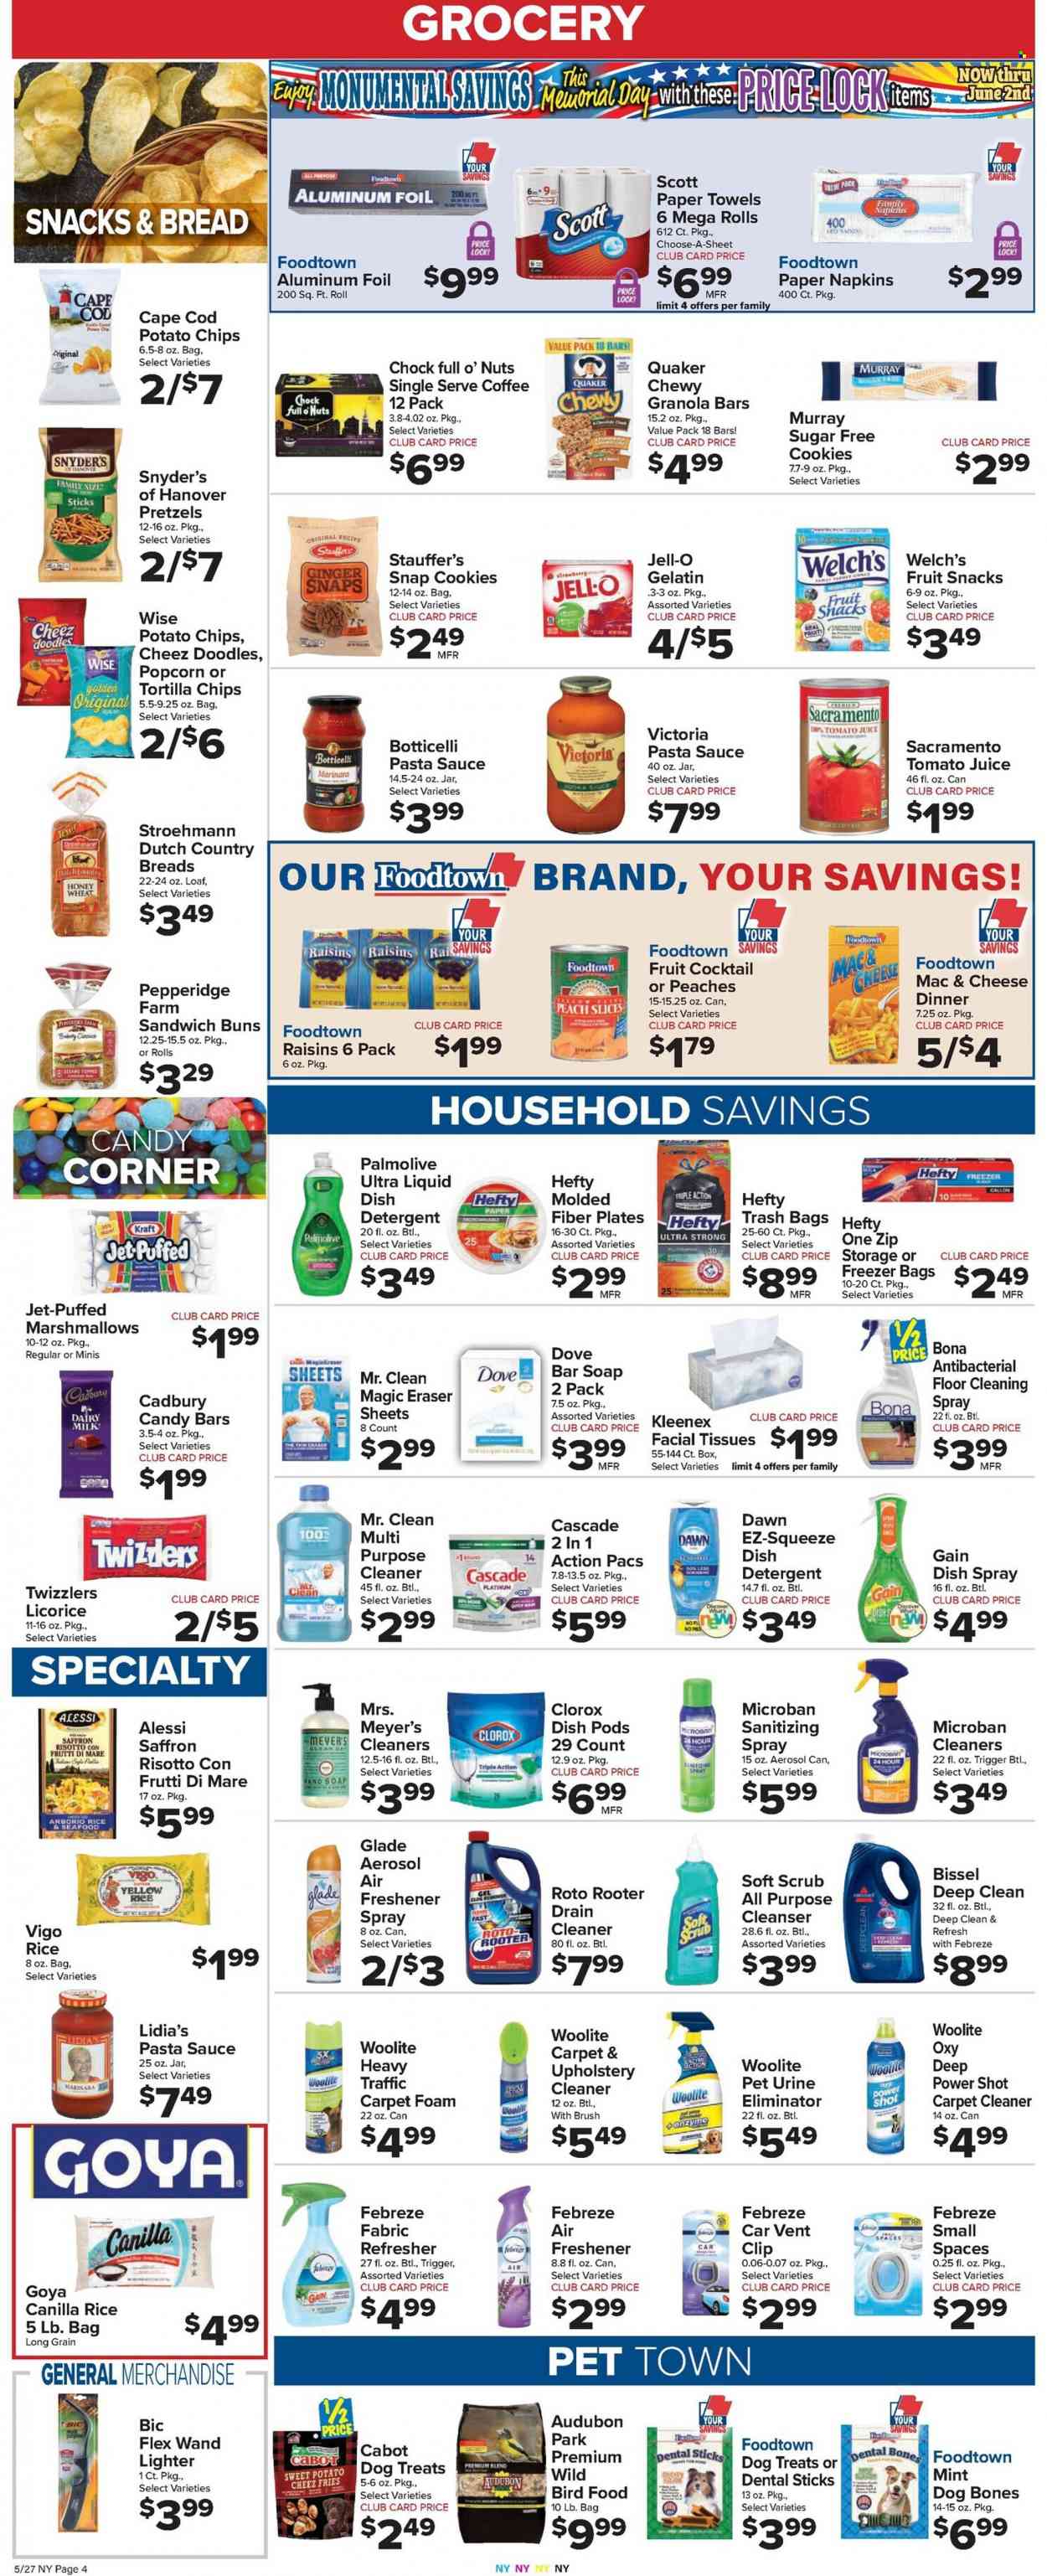 thumbnail - Foodtown Flyer - 05/27/2022 - 06/02/2022 - Sales products - bread, buns, snack, peaches, Welch's, macaroni & cheese, risotto, pasta sauce, sandwich, sauce, Quaker, Kraft®, Dove, potato fries, cookies, chocolate, Cadbury, Dairy Milk, fruit snack, fruit slices, candy bar, sweets, tortilla chips, potato chips, chips, popcorn, Jell-O, Goya, granola bar, rice, mint, raisins, dried fruit, tomato juice, vegetable juice, coffee, napkins, Kleenex, Scott, tissues, kitchen towels, paper towels, Febreze, Gain, Clorox, Woolite, carpet cleaner, drain cleaner, Cascade, fabric refresher, dishwashing liquid, dishwasher tablets, Palmolive, soap bar, soap, cleanser, facial tissues, refresher, Hefty, trash bags, plate, aluminium foil, freezer bag, air freshener, Glade, freshener spray, animal food, animal treats, bird food, dog food, dog treat. Page 4.